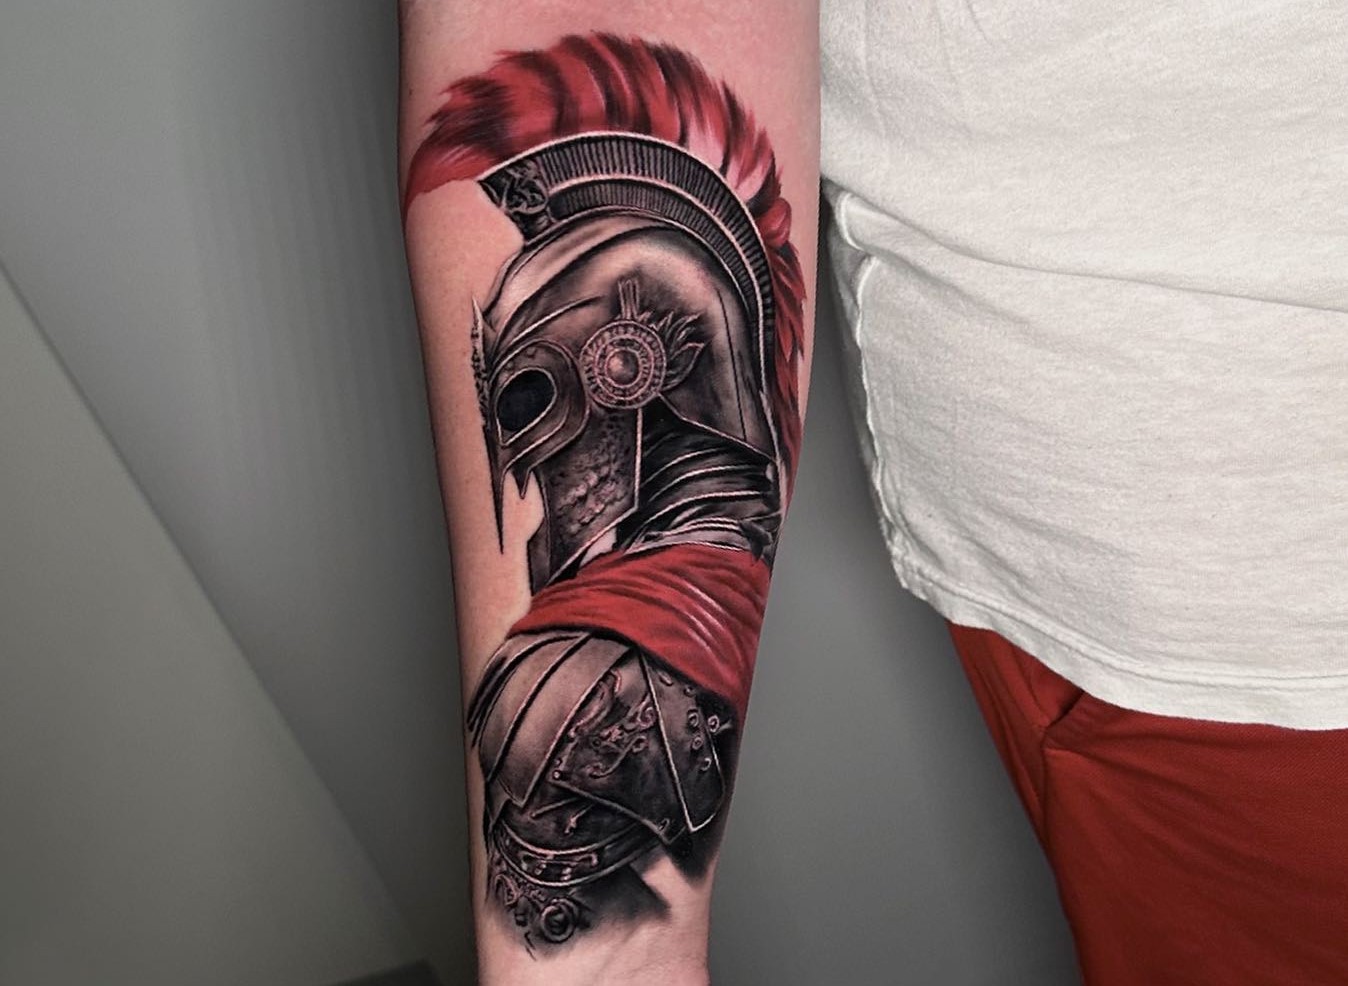 101 Amazing Gladiator Tattoo Ideas To Inspire You In 2023! - Outsons